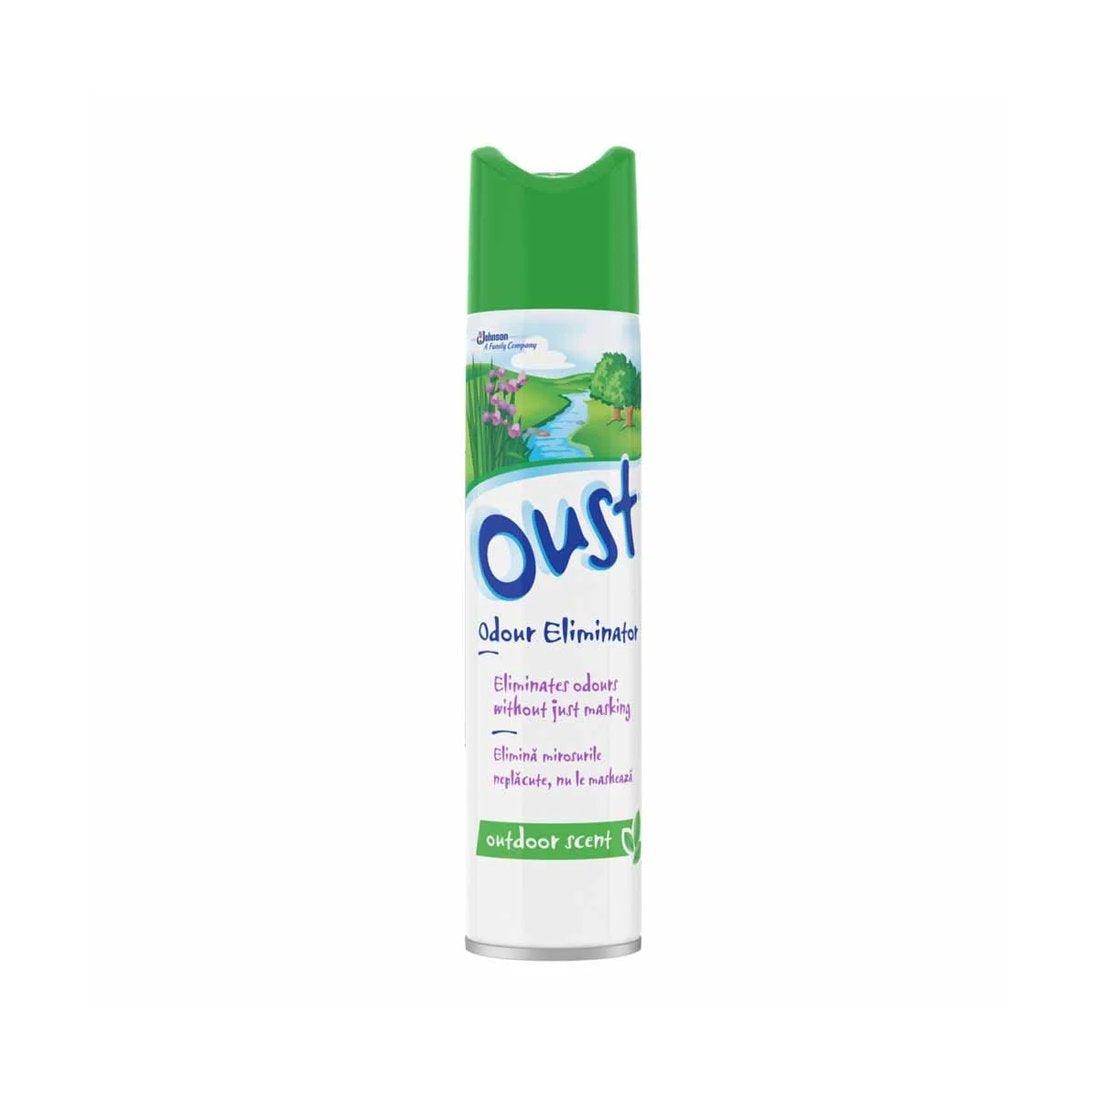 Oust Outdoor Scent Air Freshener - 300ml - Vending Superstore